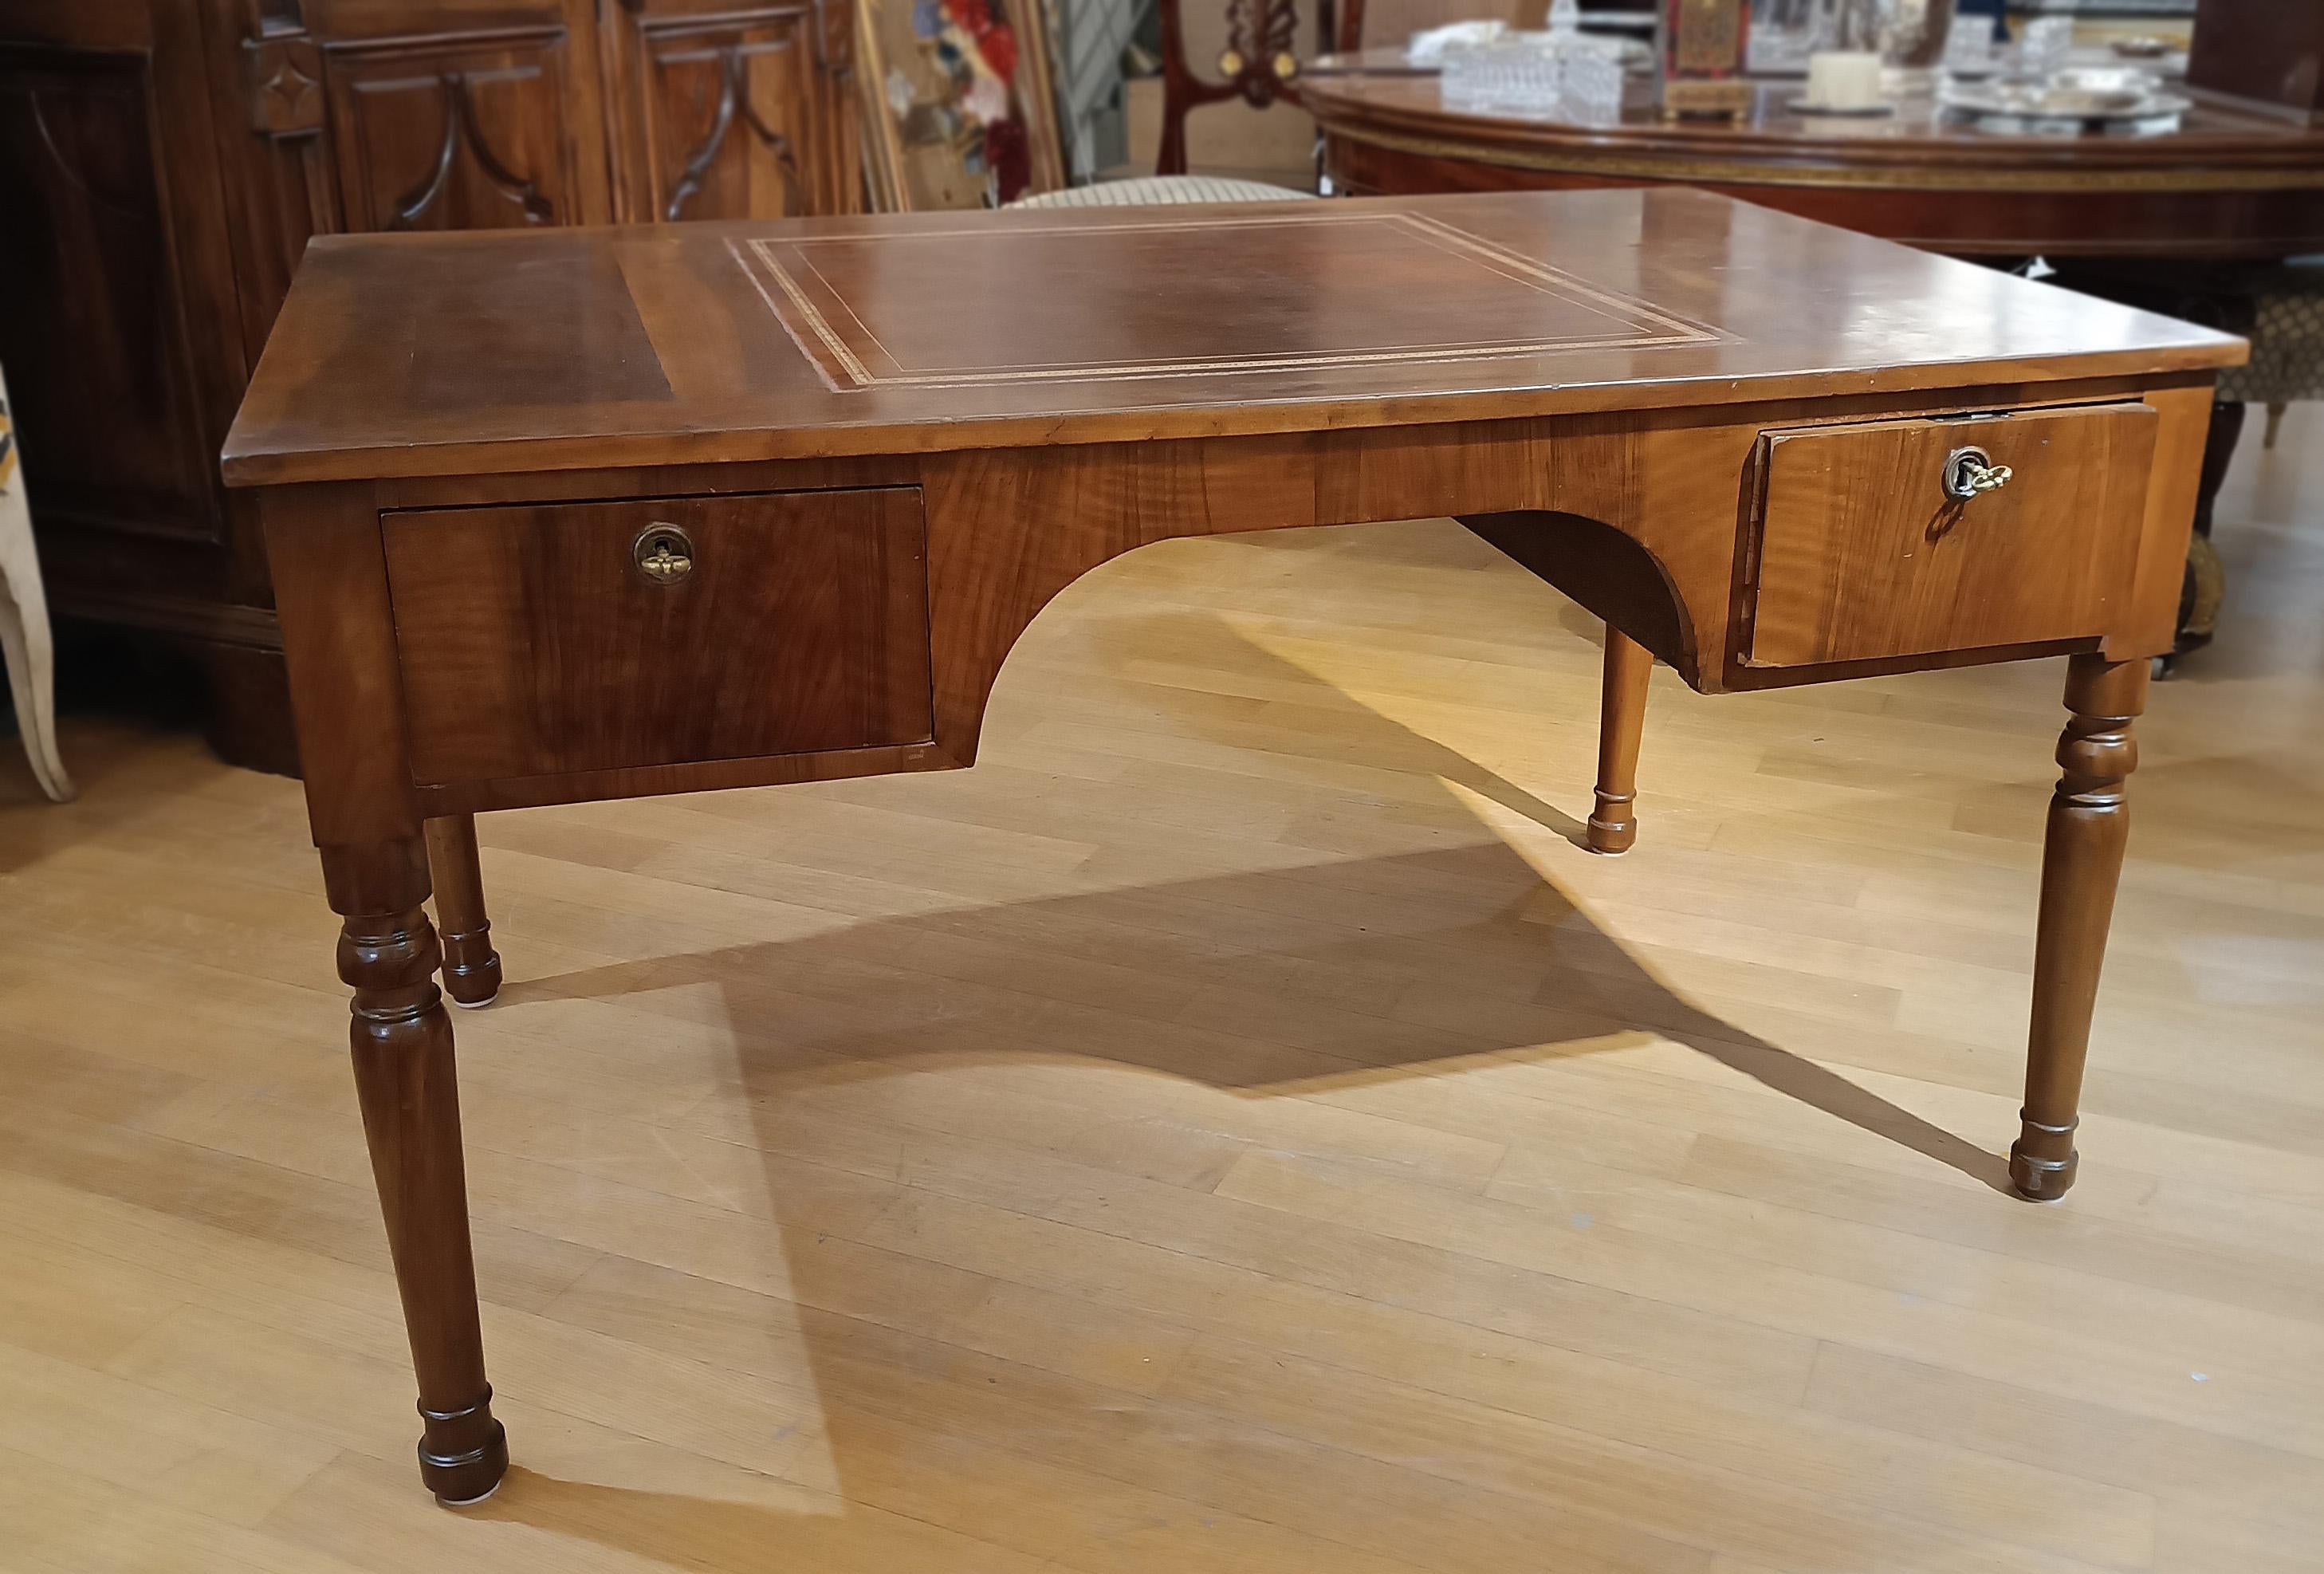 This desk is a refined piece of furniture made entirely of solid and feather walnut. The table top is embellished with a gold and leather finish that adds a touch of luxury. The surface is also spacious and perfect for working or studying. The